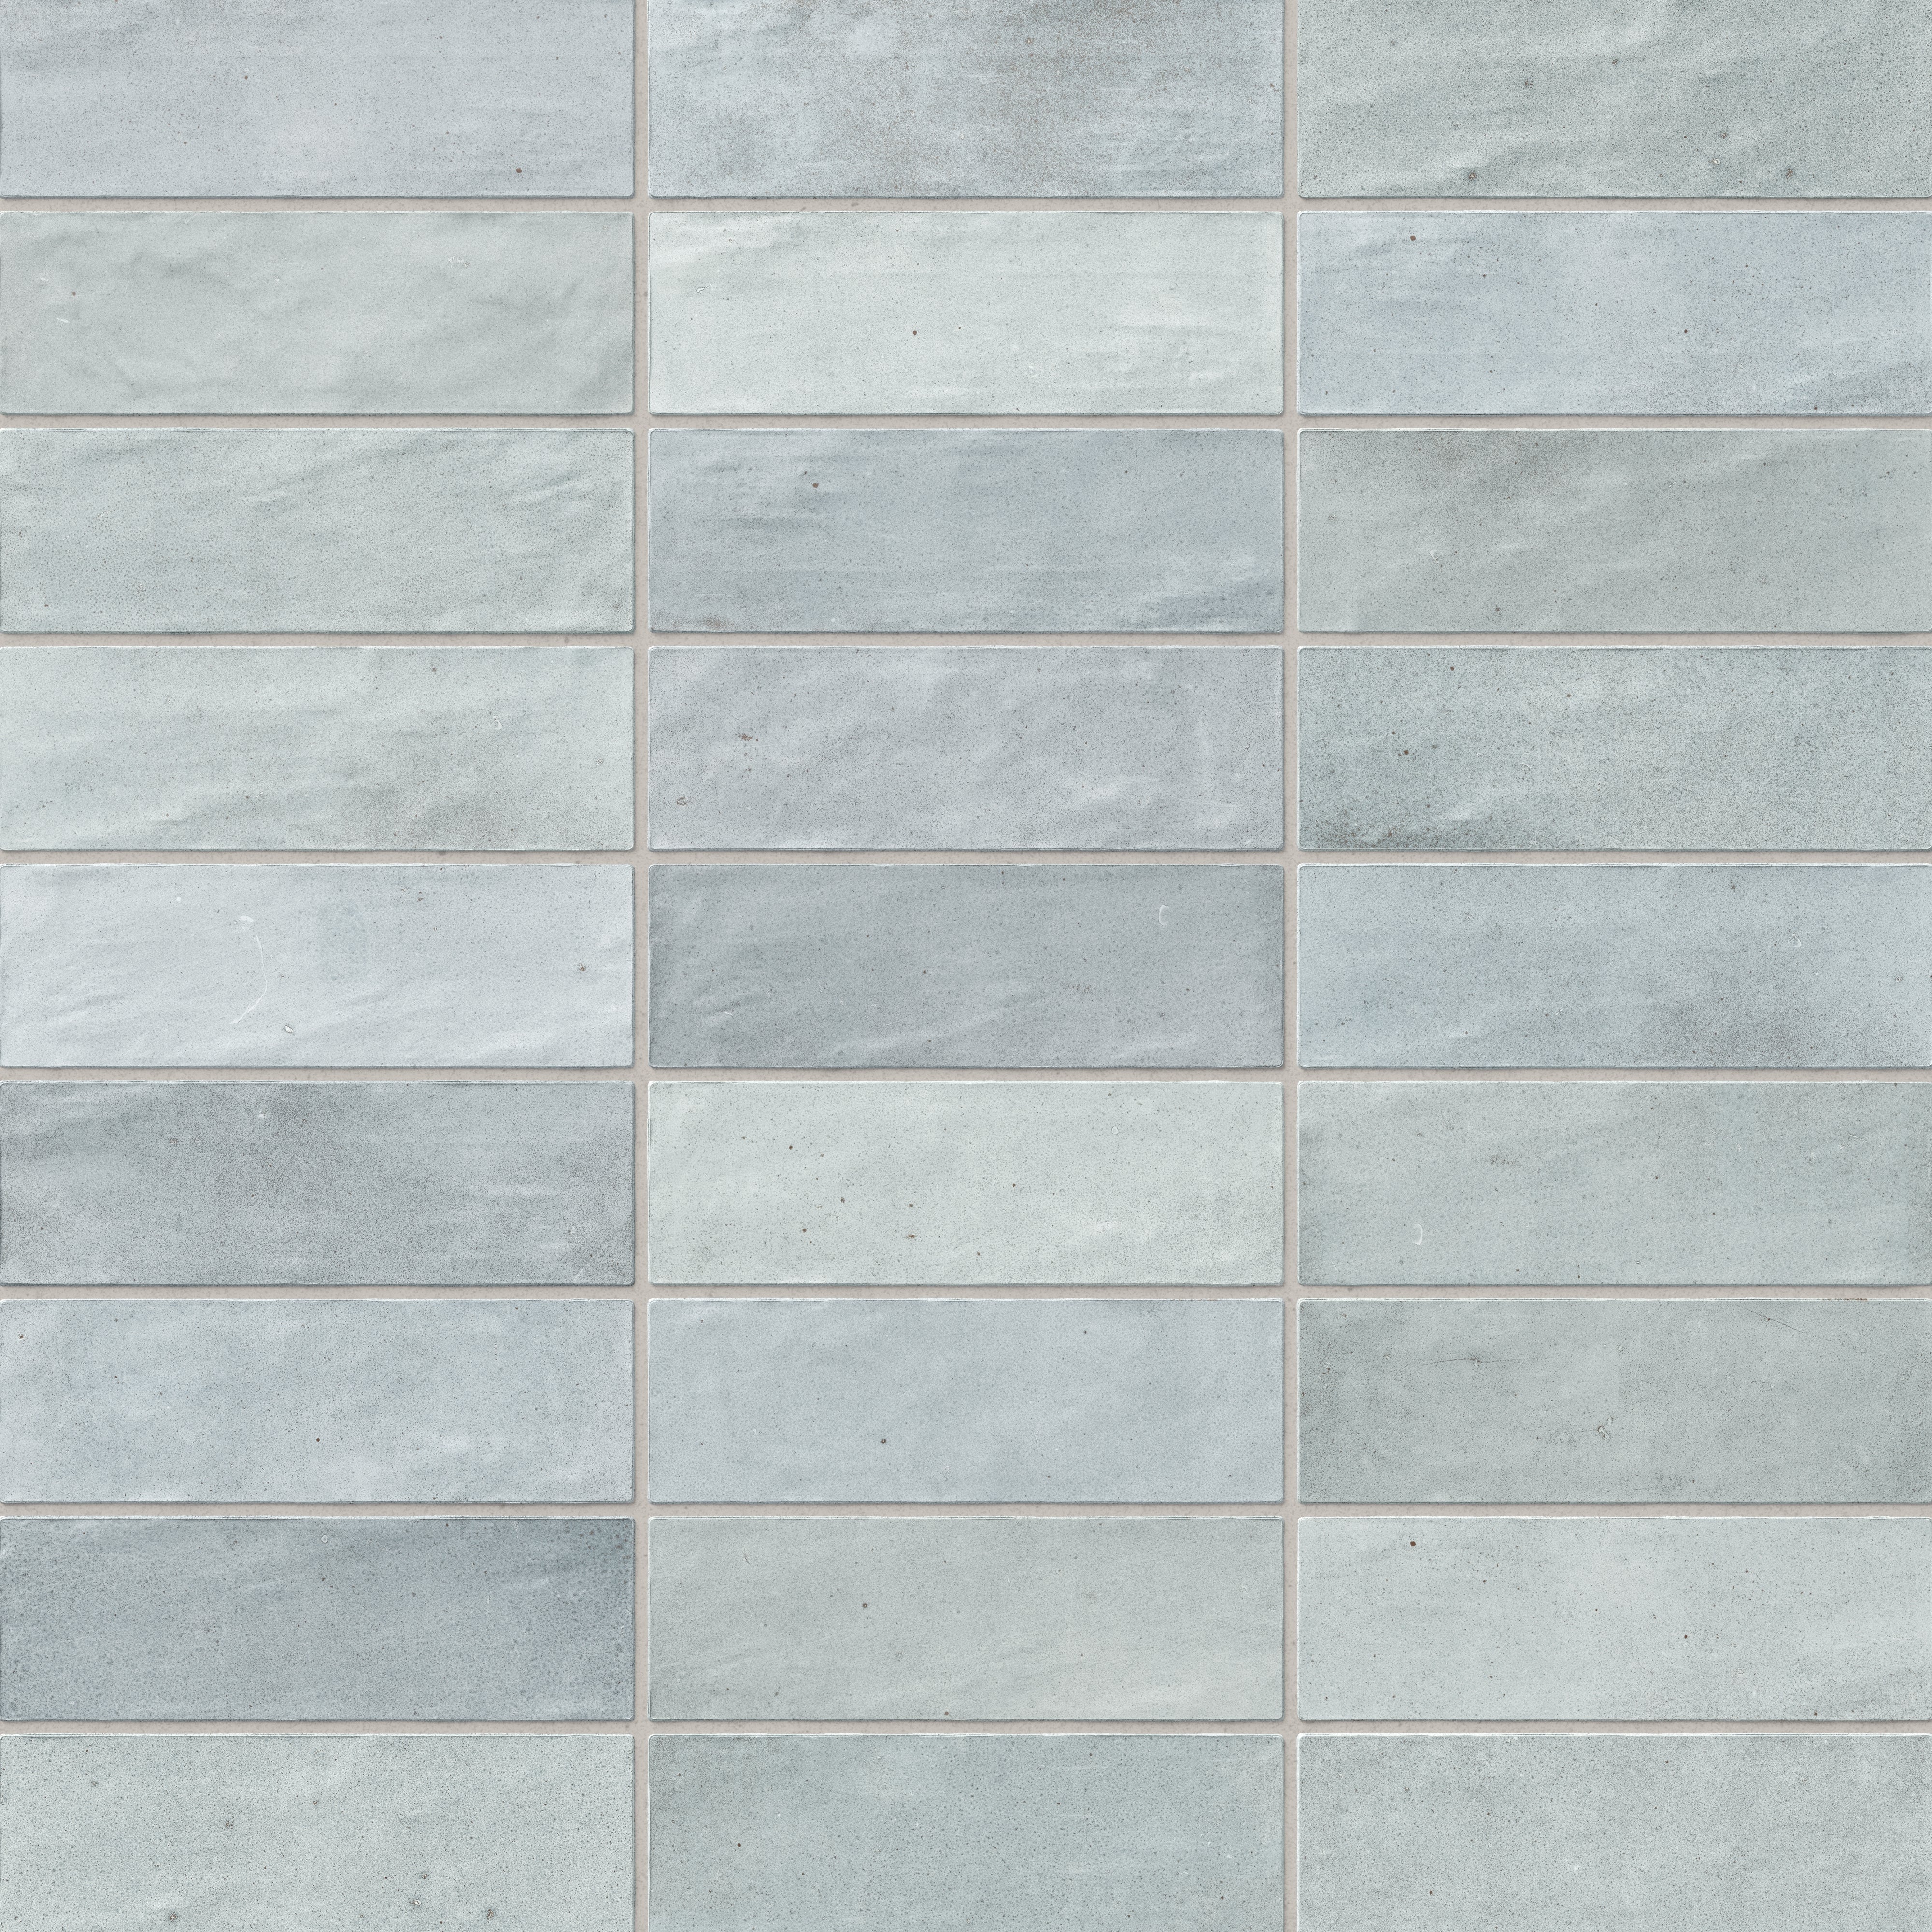 Everly 3x8 Matte Ceramic Tile in Ice